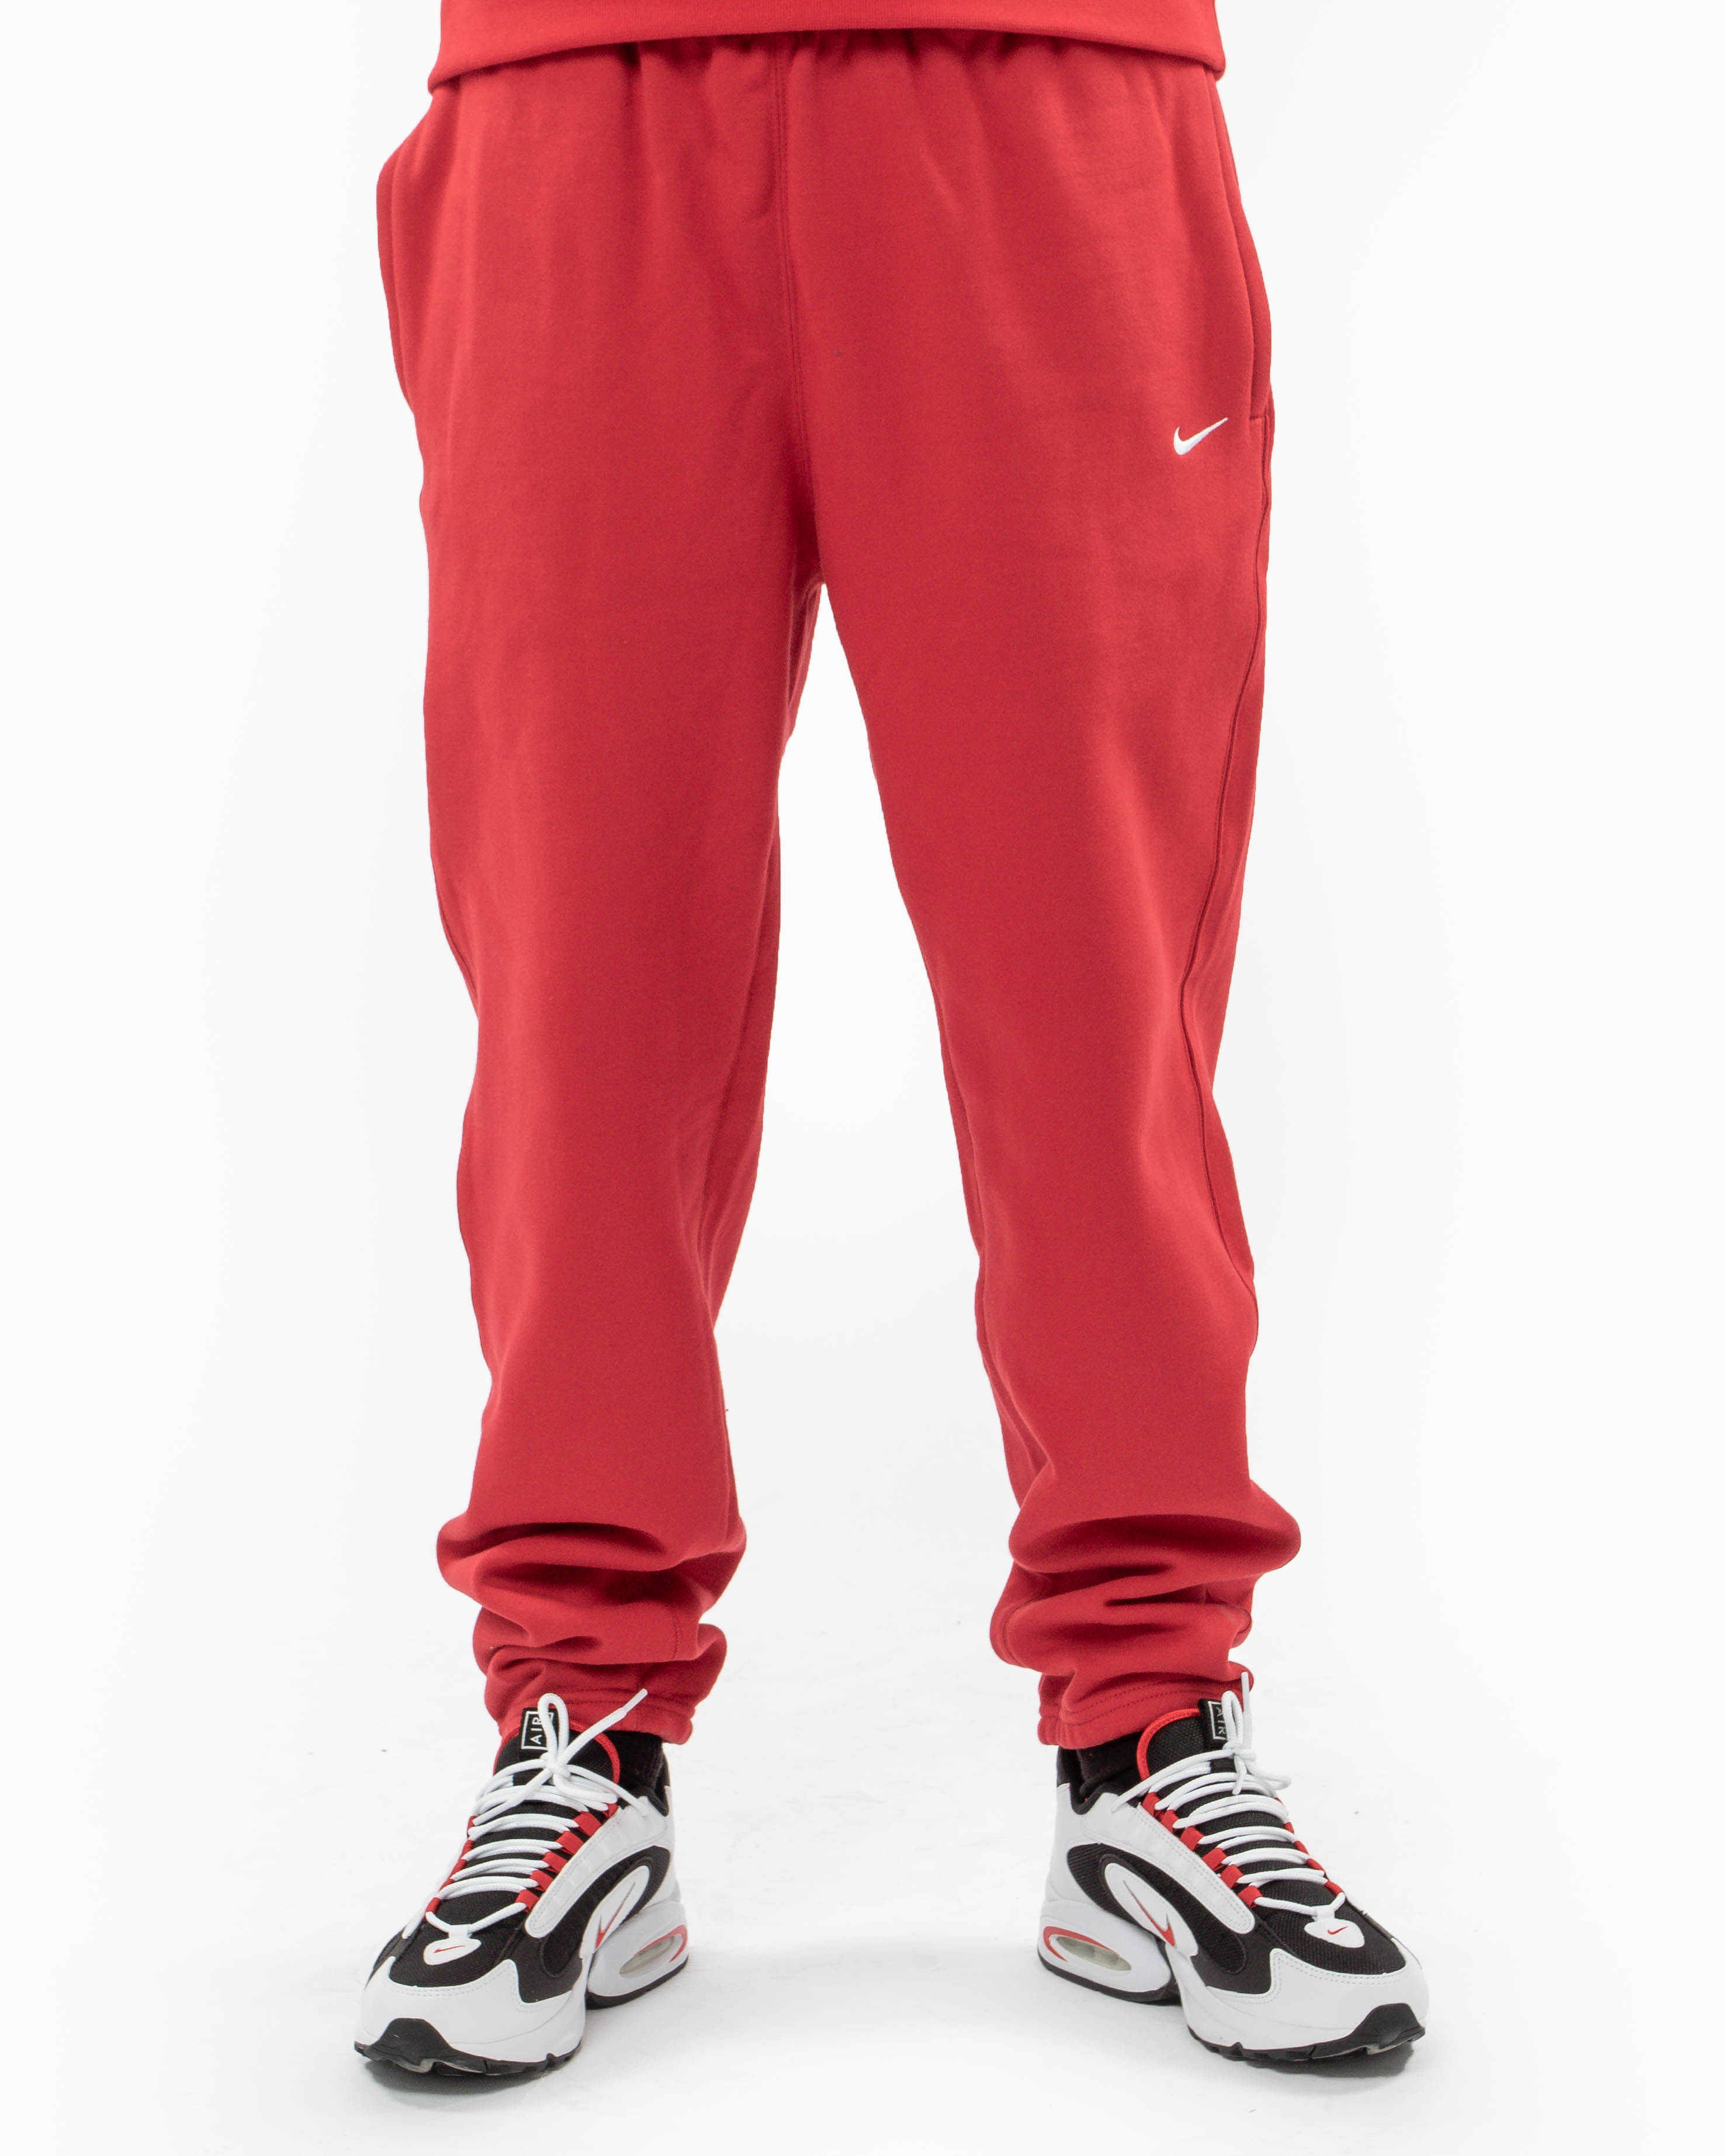 Adidas Men's Tiro 21 Track Pants - Black / Team Power Red — Just For Sports